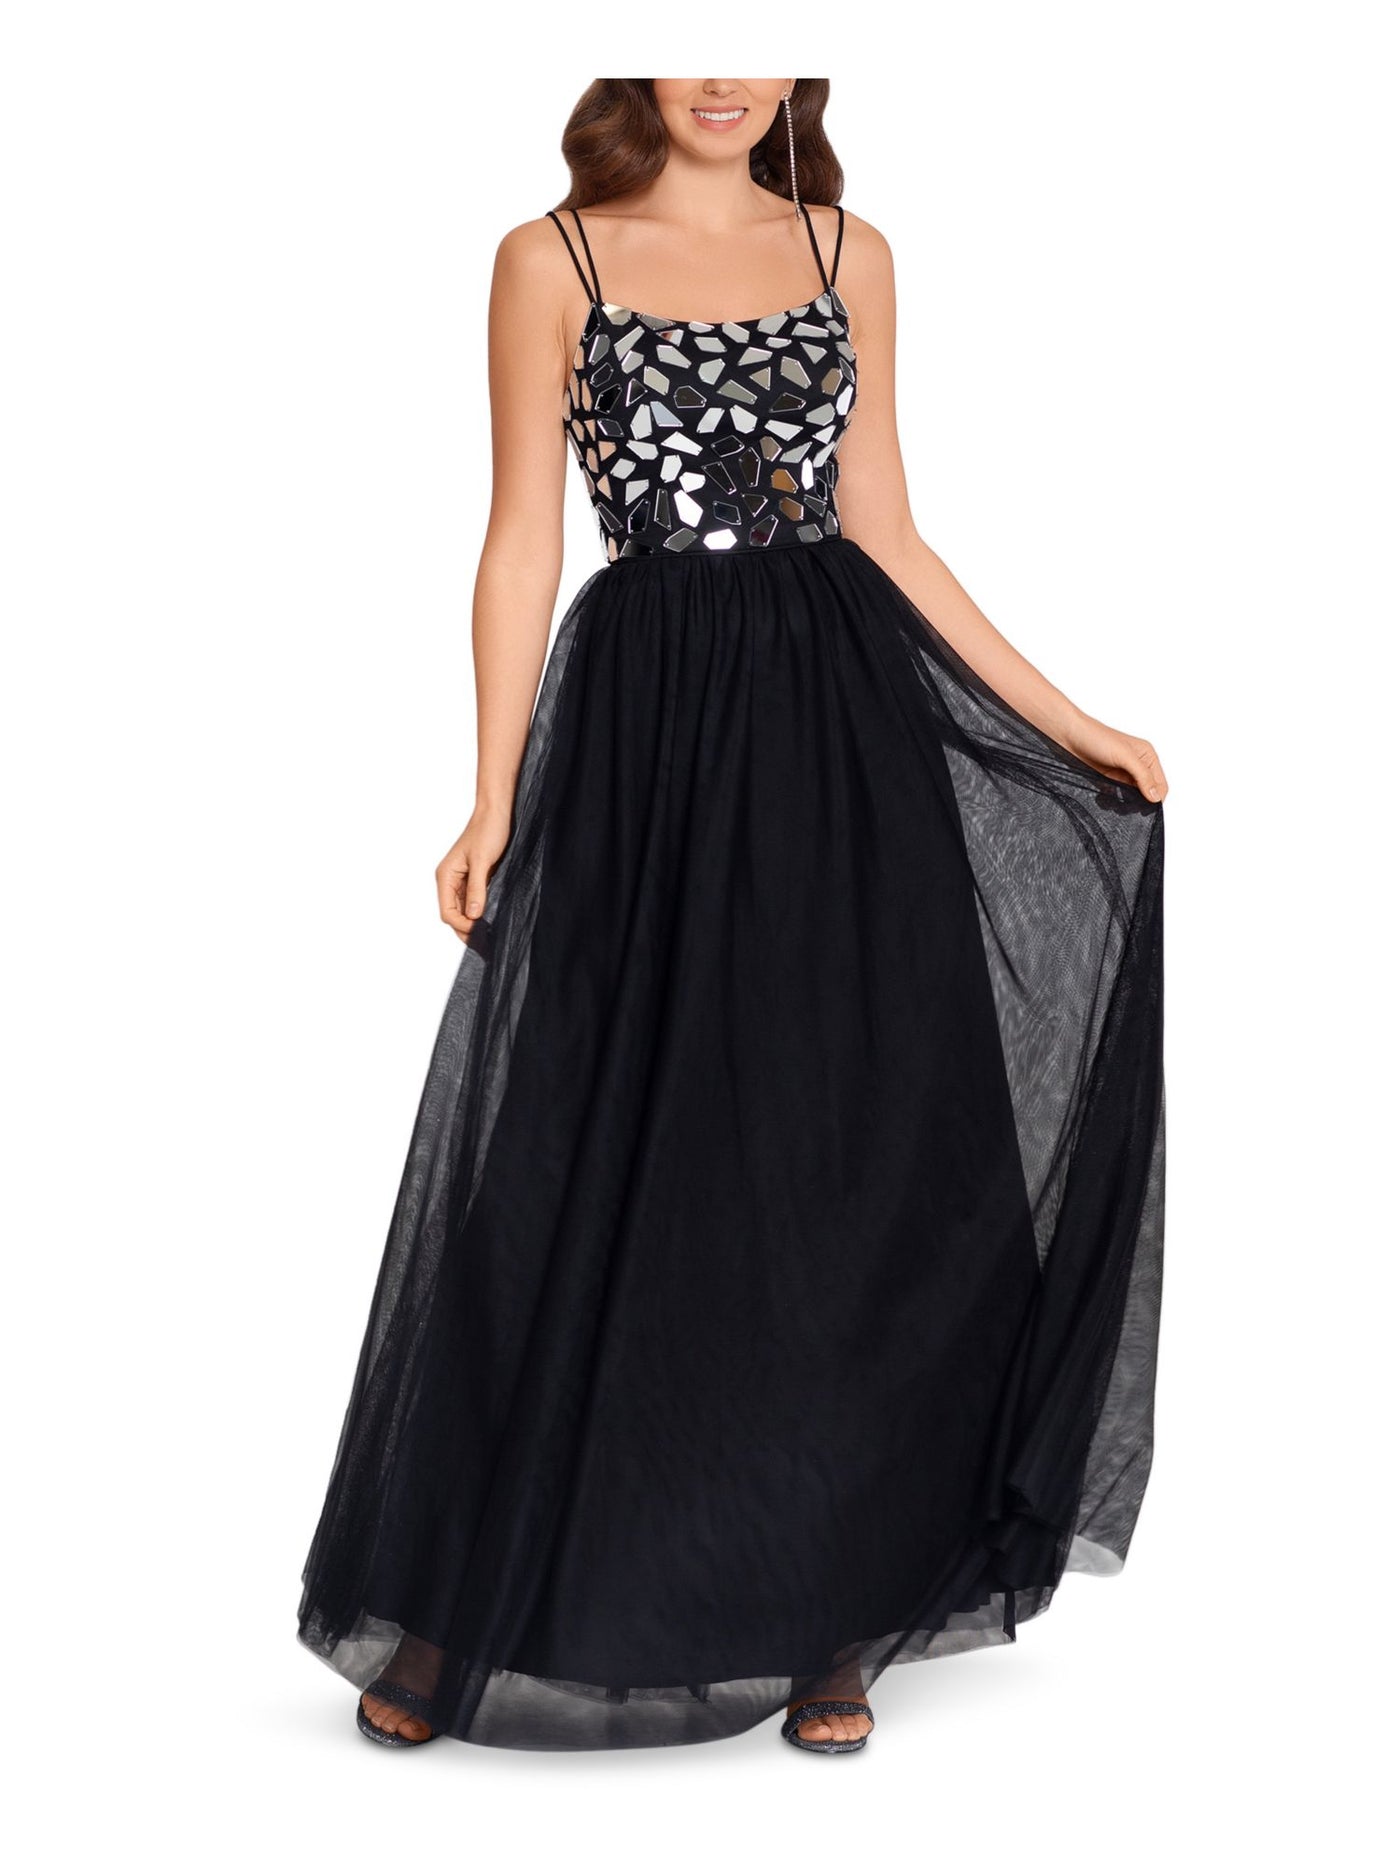 BLONDIE Womens Embellished Spaghetti Strap Scoop Neck Full-Length Formal Fit + Flare Dress